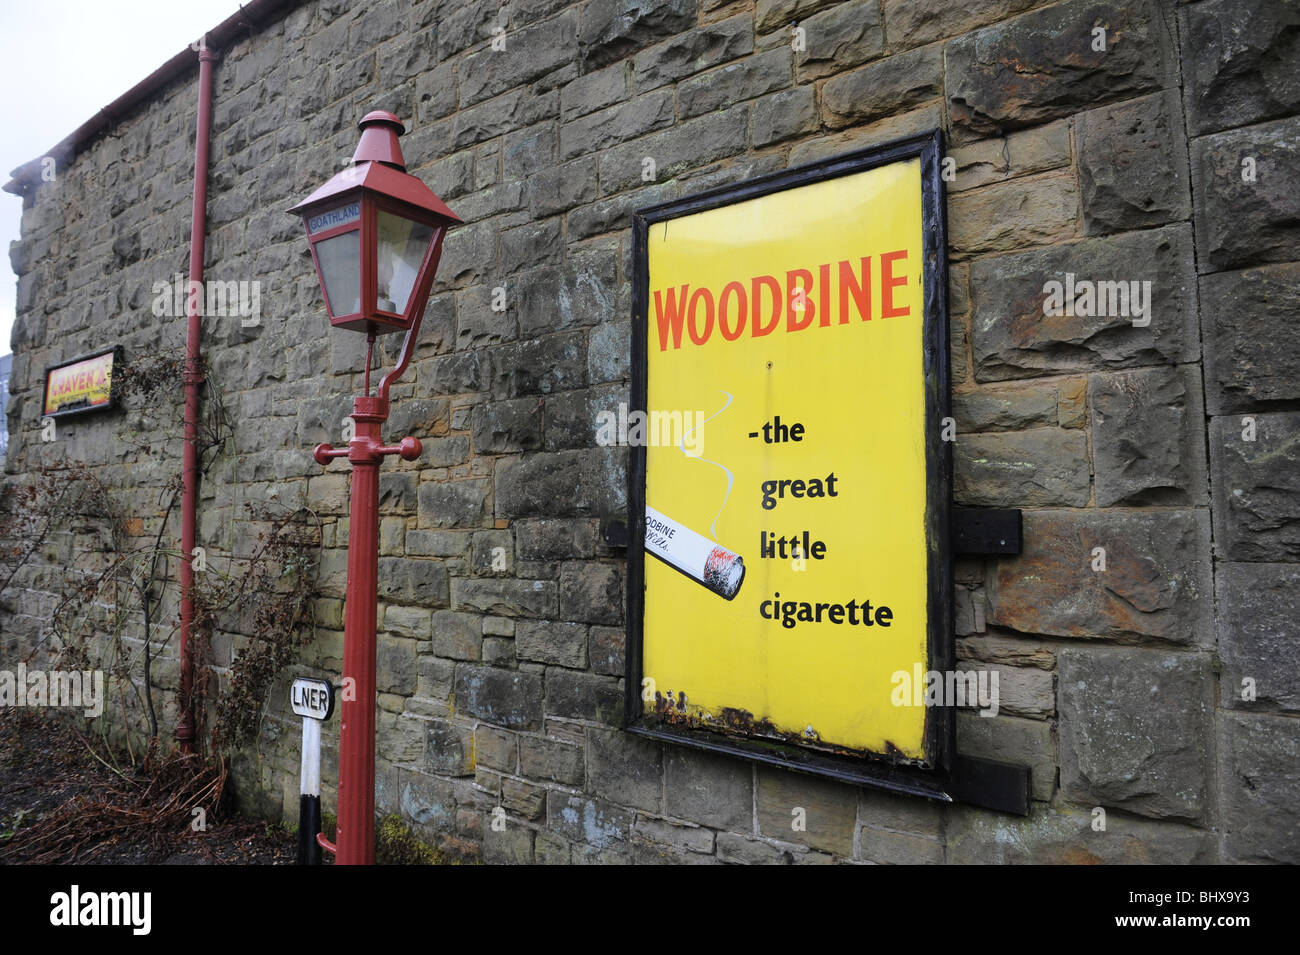 Woodbine Cigarette advertising at Goathland Station on the North Yorkshire Moors Railway Stock Photo